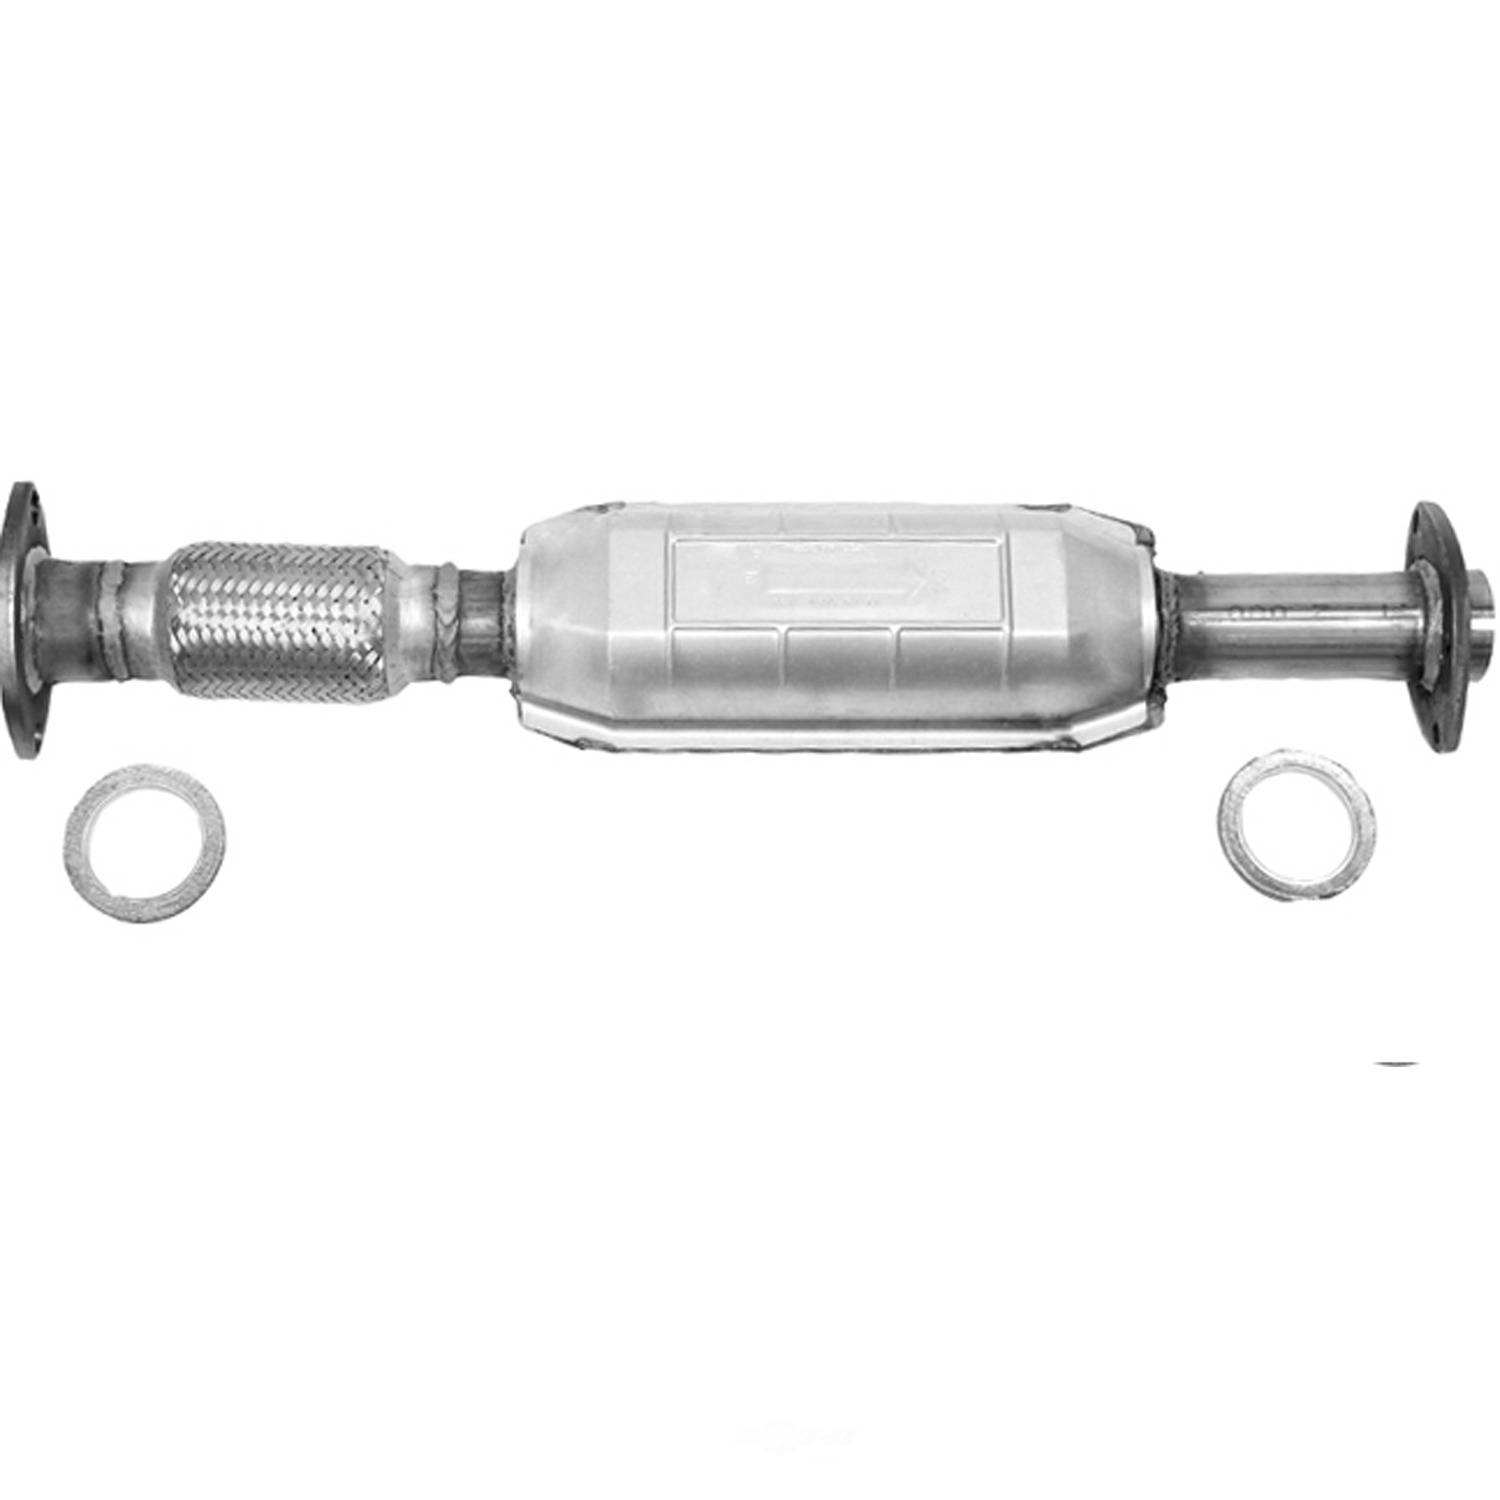 AP EXHAUST FEDERAL CONVERTER - Direct Fit Converter - APG 642128